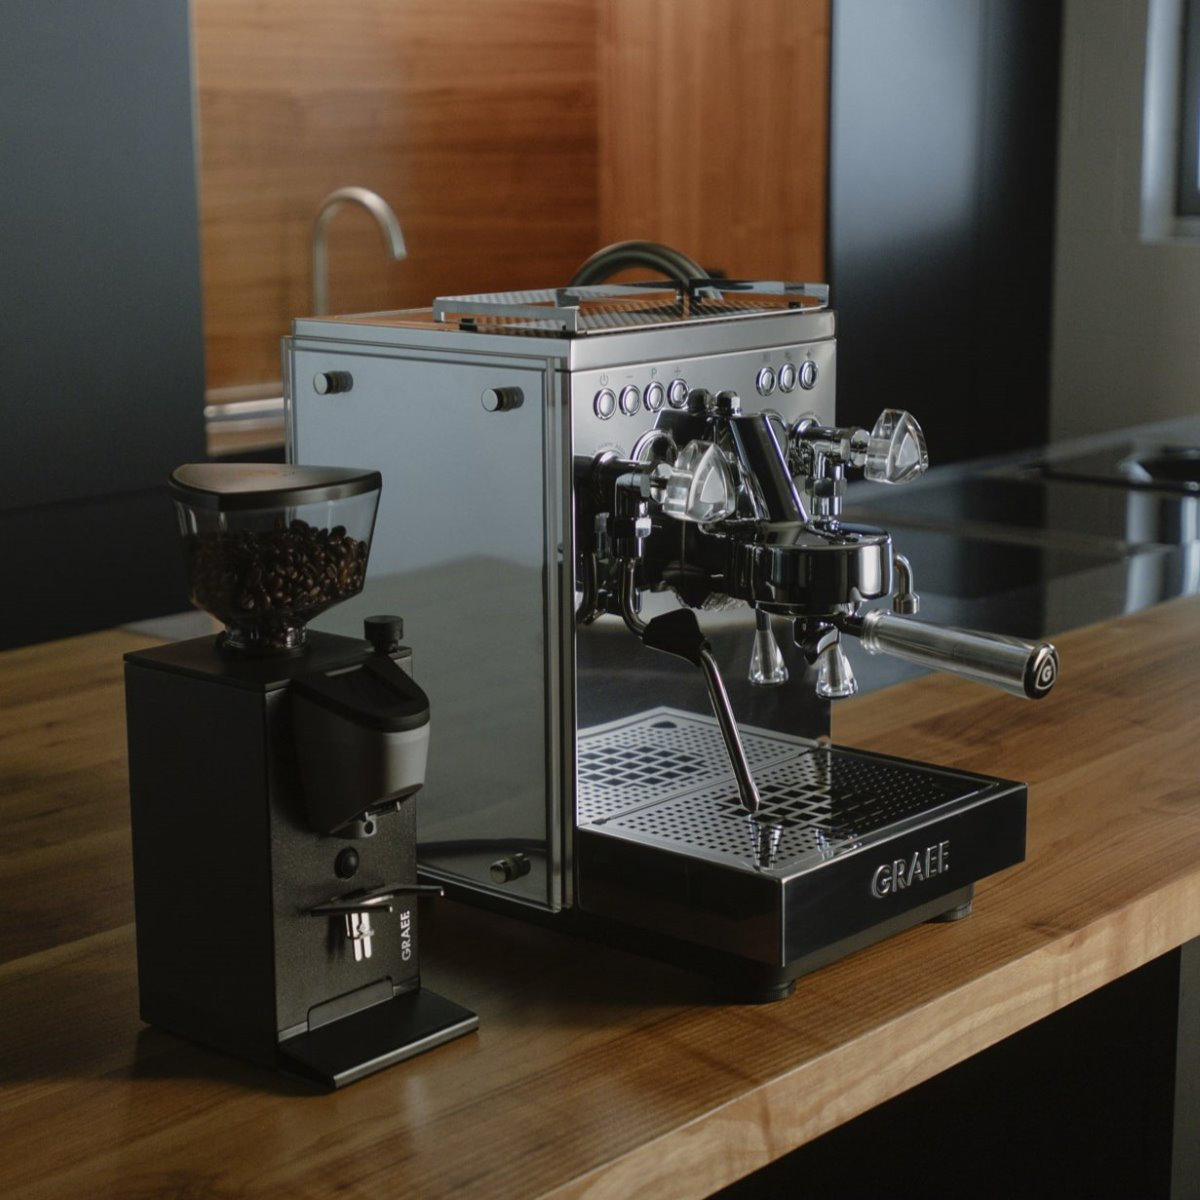 High-end products: “Estessa” portafilter and coffee grinder from Graef.